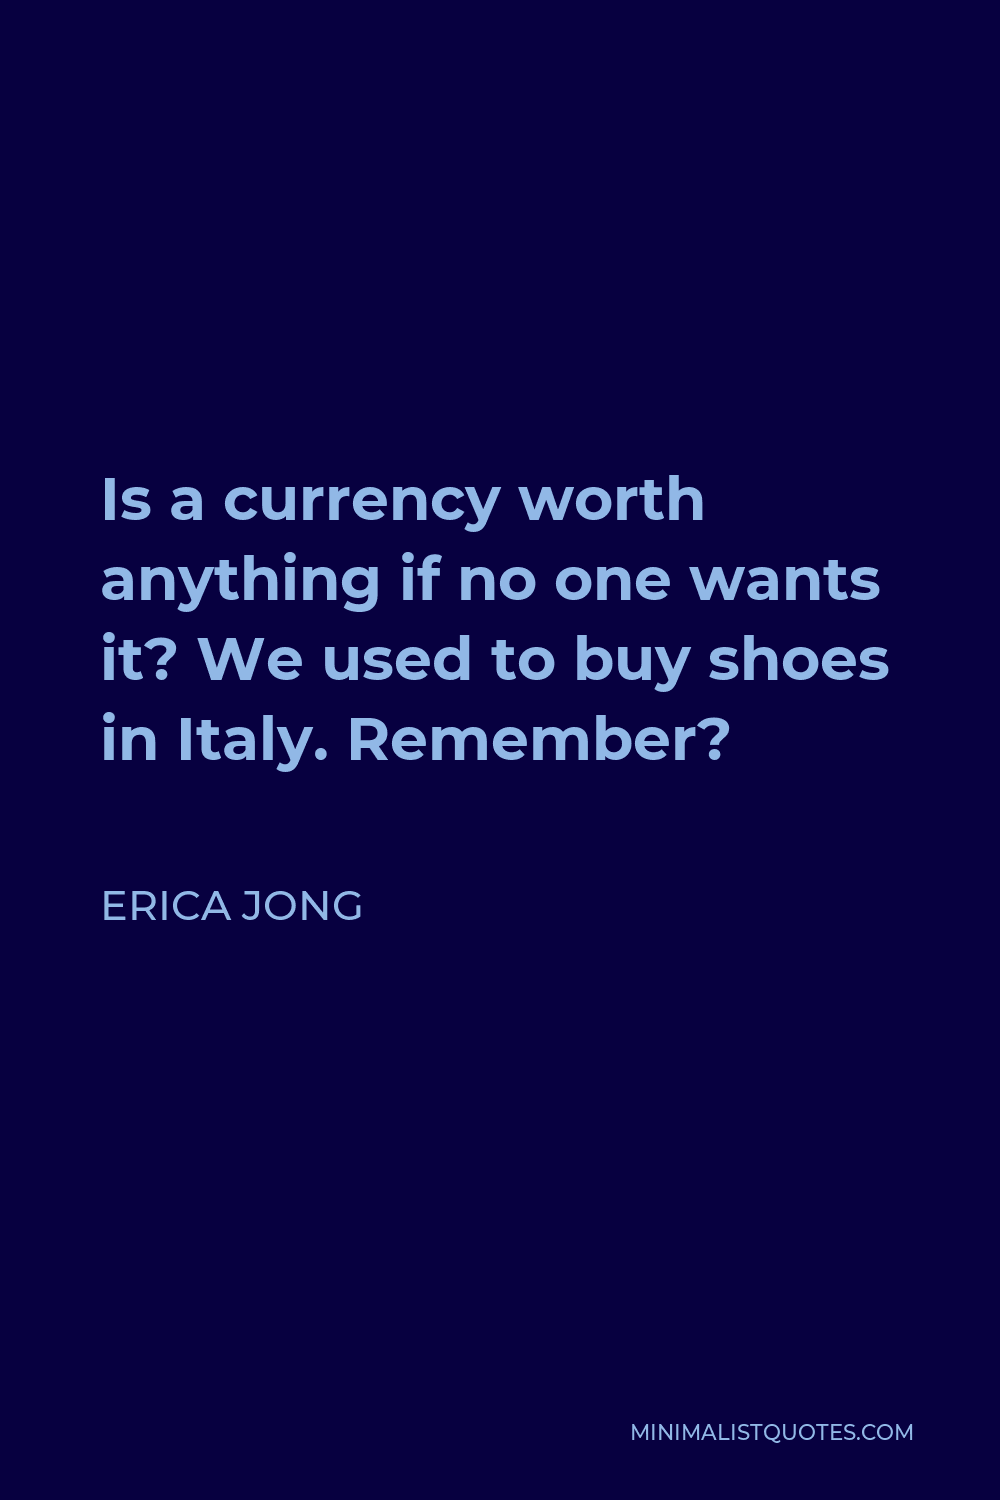 Erica Jong Quote - Is a currency worth anything if no one wants it? We used to buy shoes in Italy. Remember?